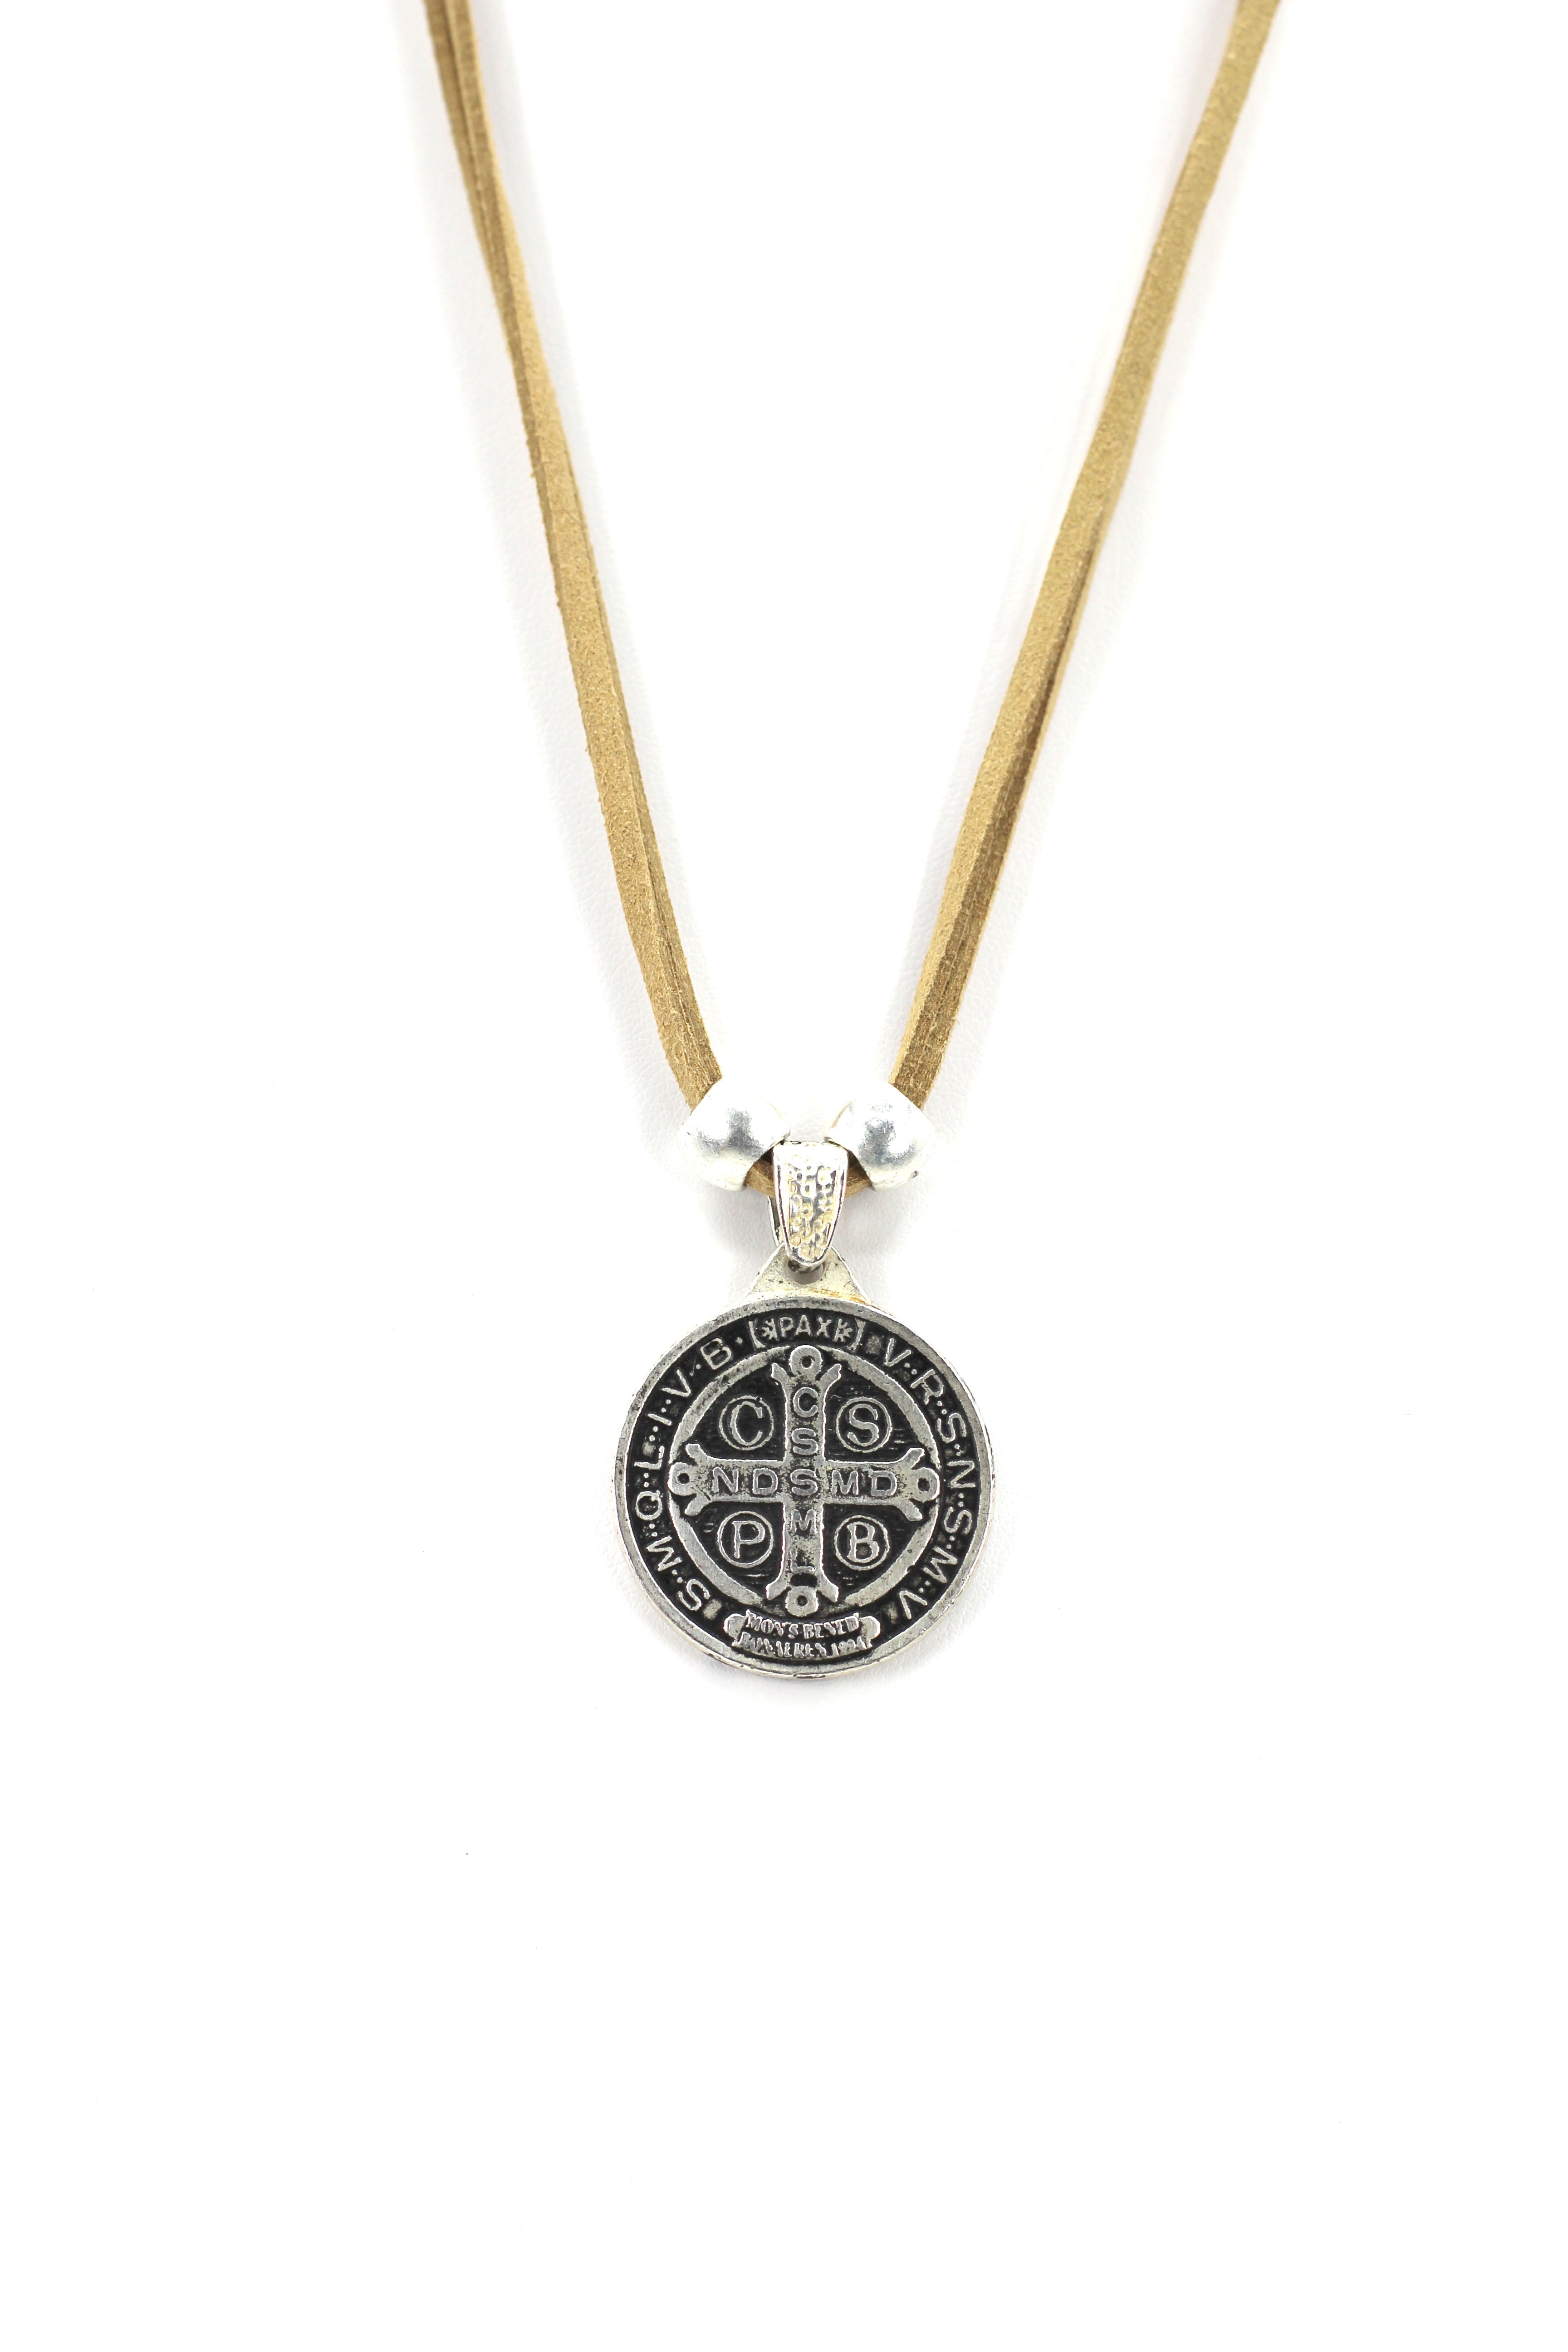 Vintage Necklace of Saint Benedict Handmade Jewelry with Genuine Leather and Reversible strap by Graciela's Collection